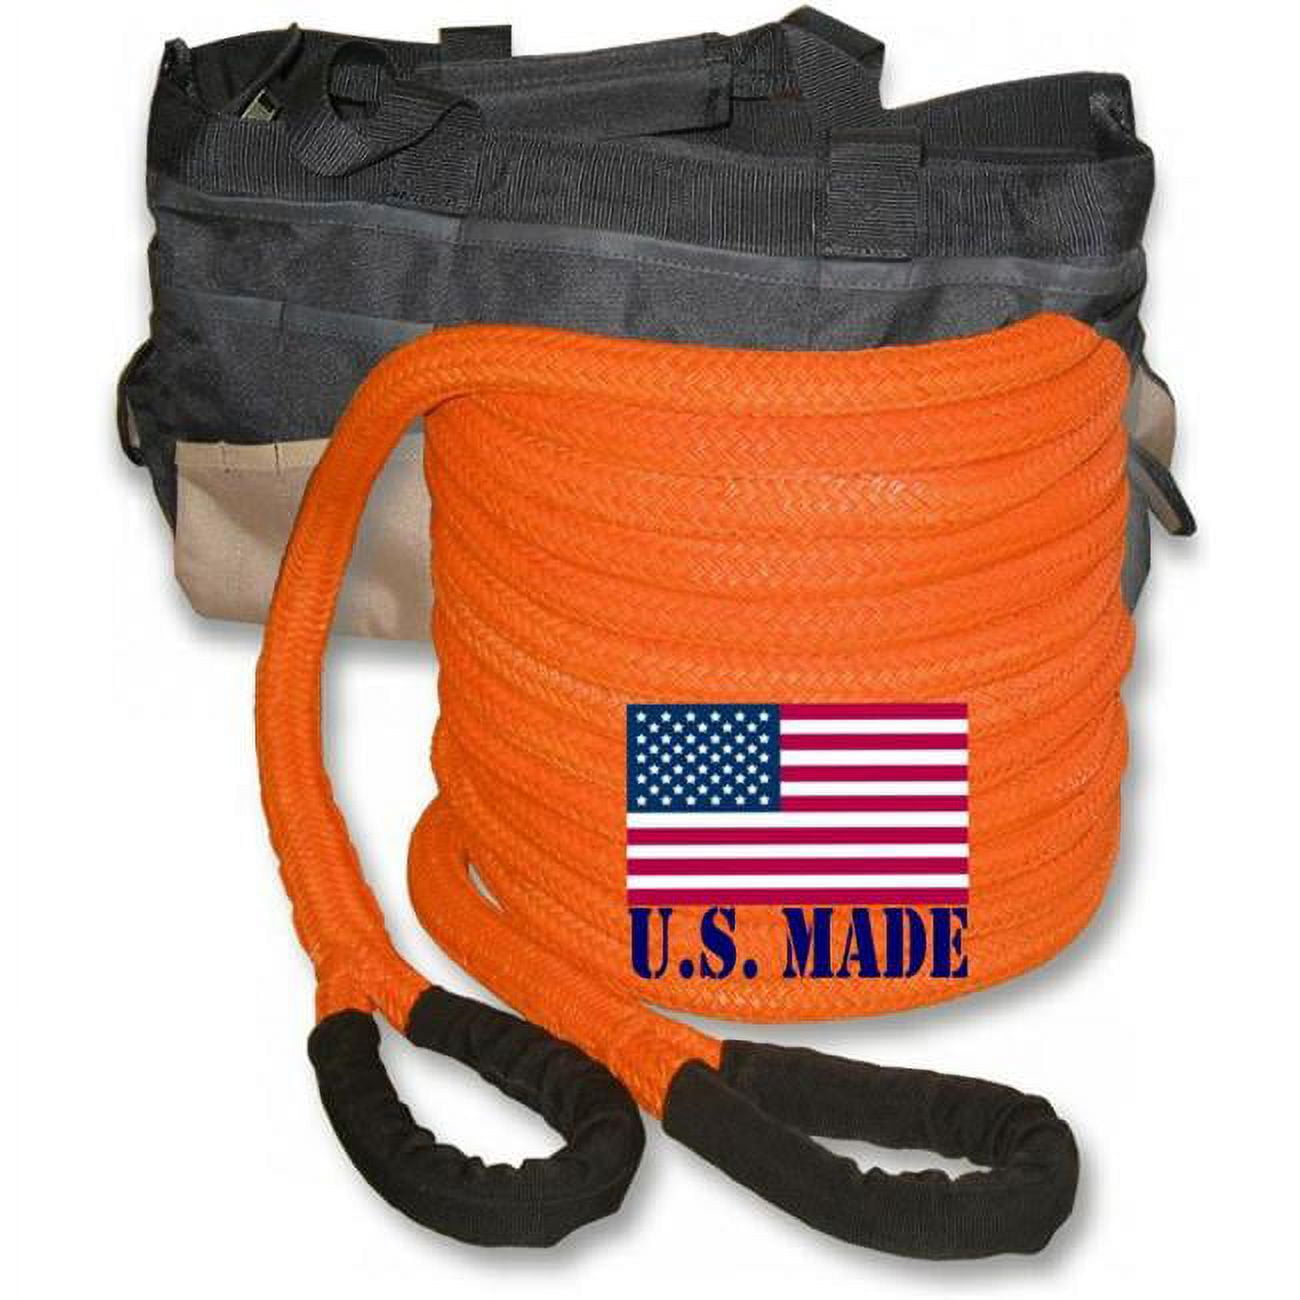 U.s. Made 1 Inch X 10 Ft "safety Orange" Safe-t-line® Kinetic Snatch Rope With Heavy-duty Carry Bag (4x4 Vehicle Recovery)